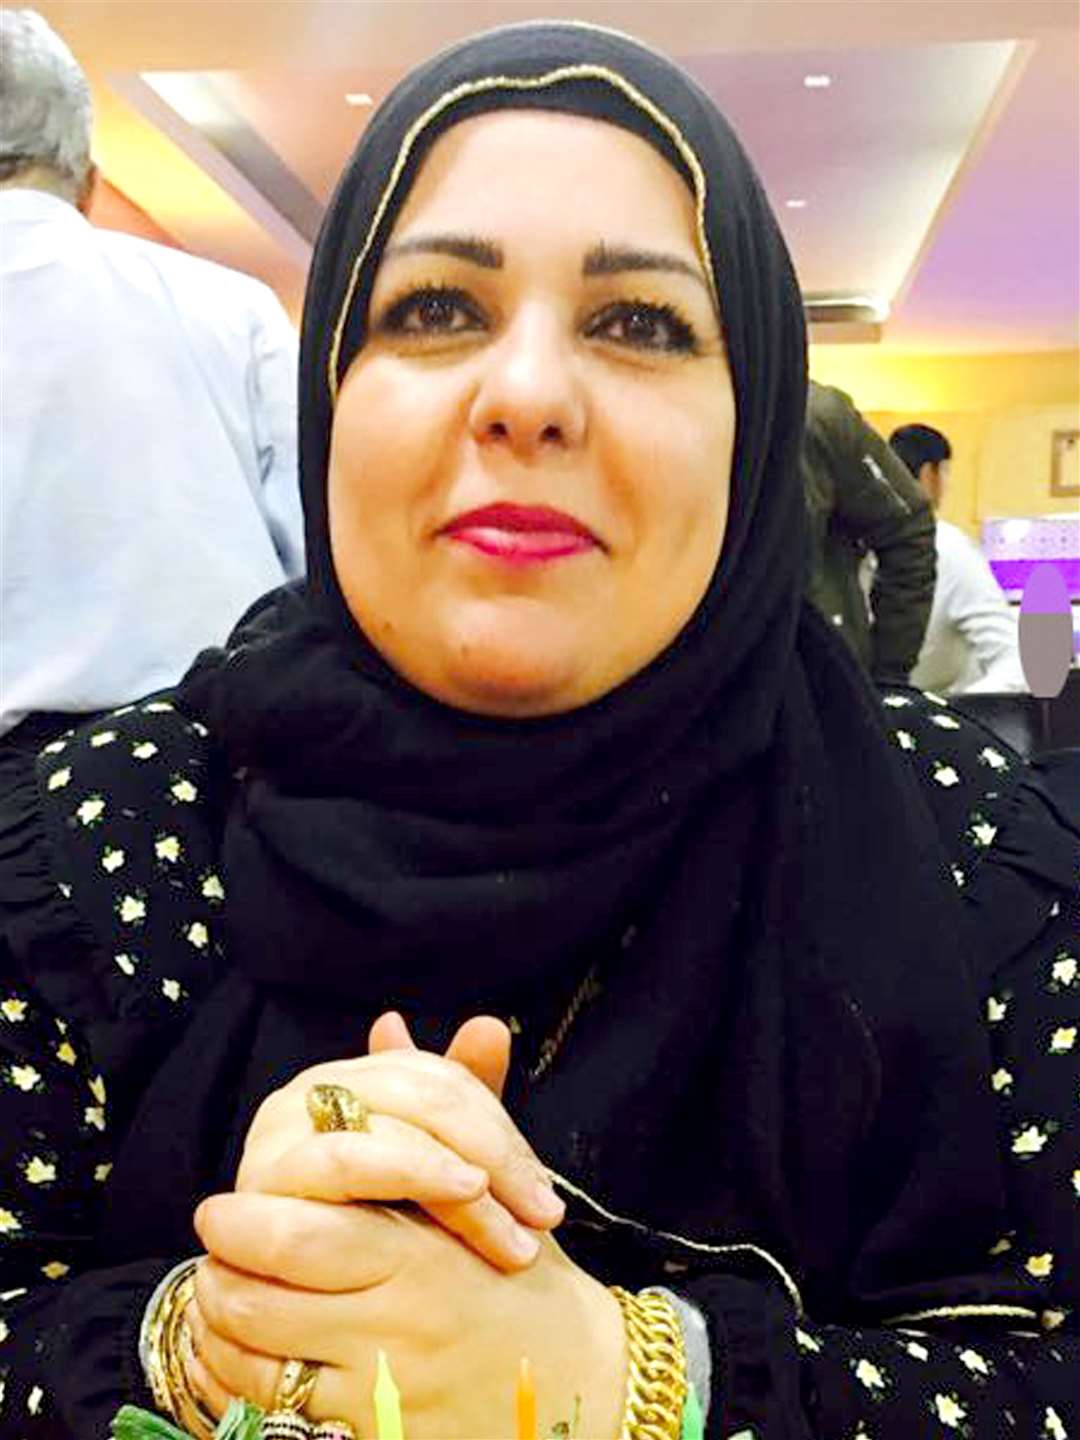 Khowla Saleem, who was stabbed to death along with her daughter Raneem (West Midlands Police/PA)